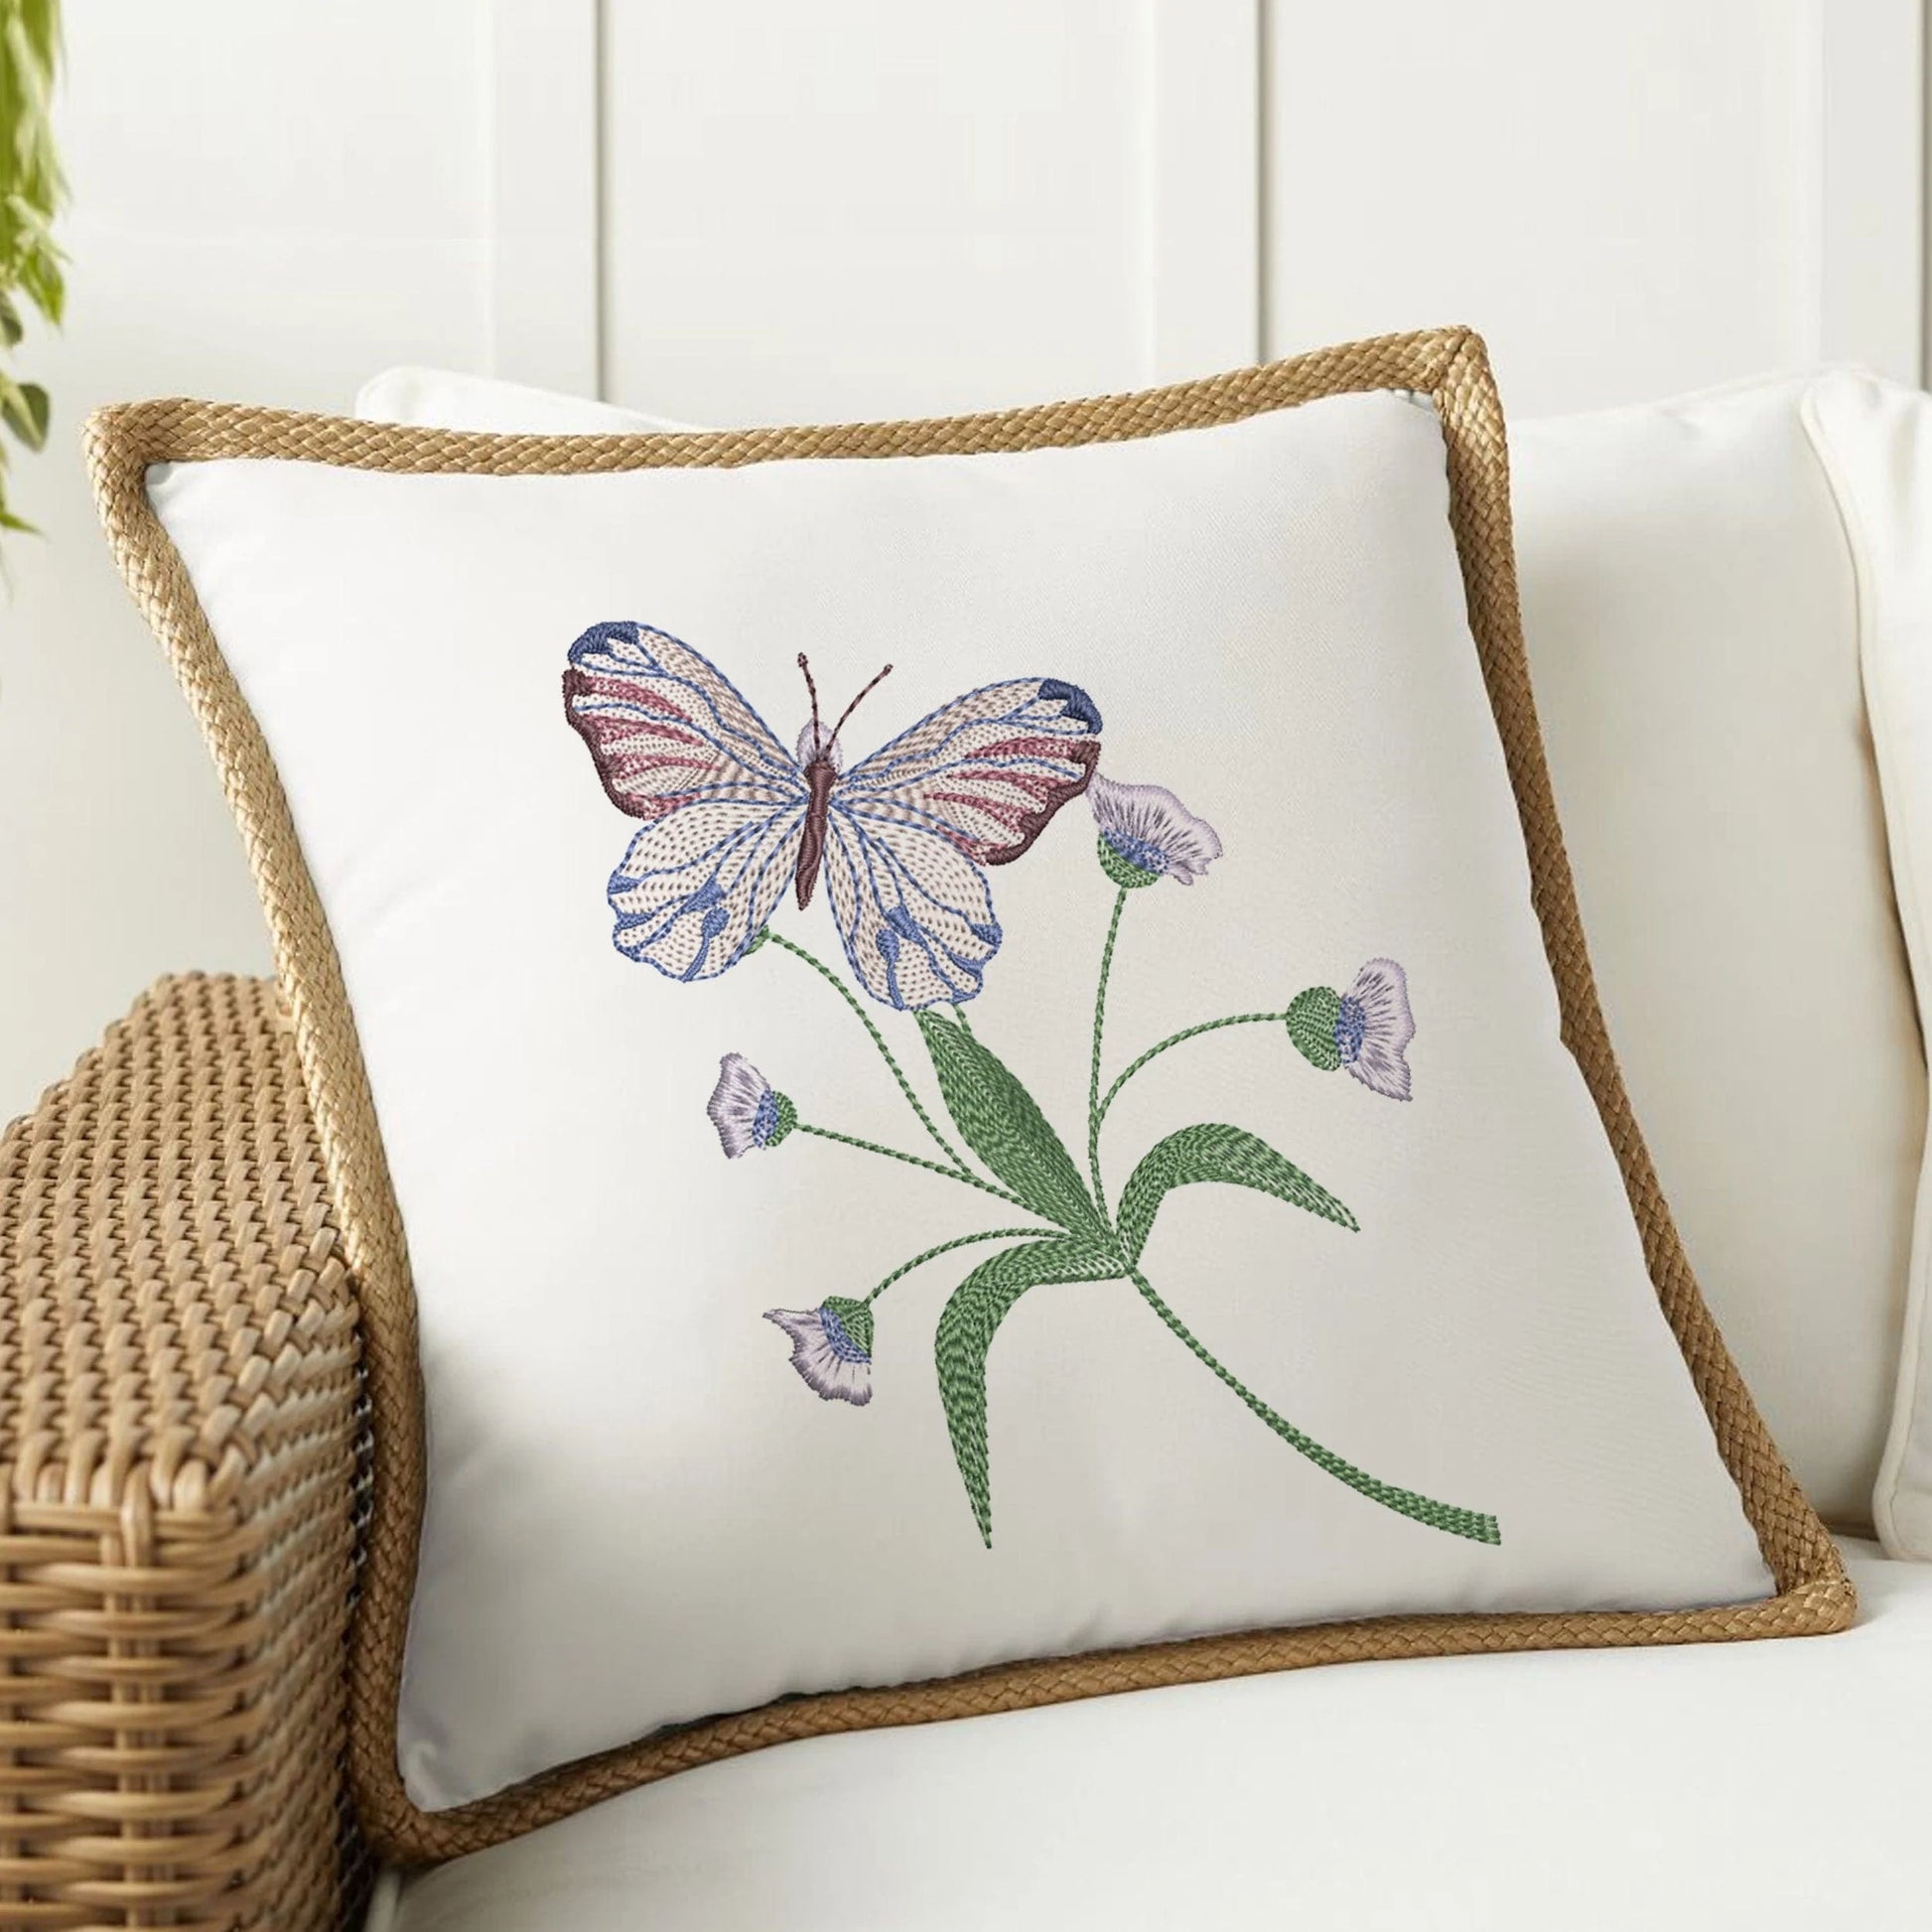 Flower Butterfly Machine Embroidery Design on home pillow